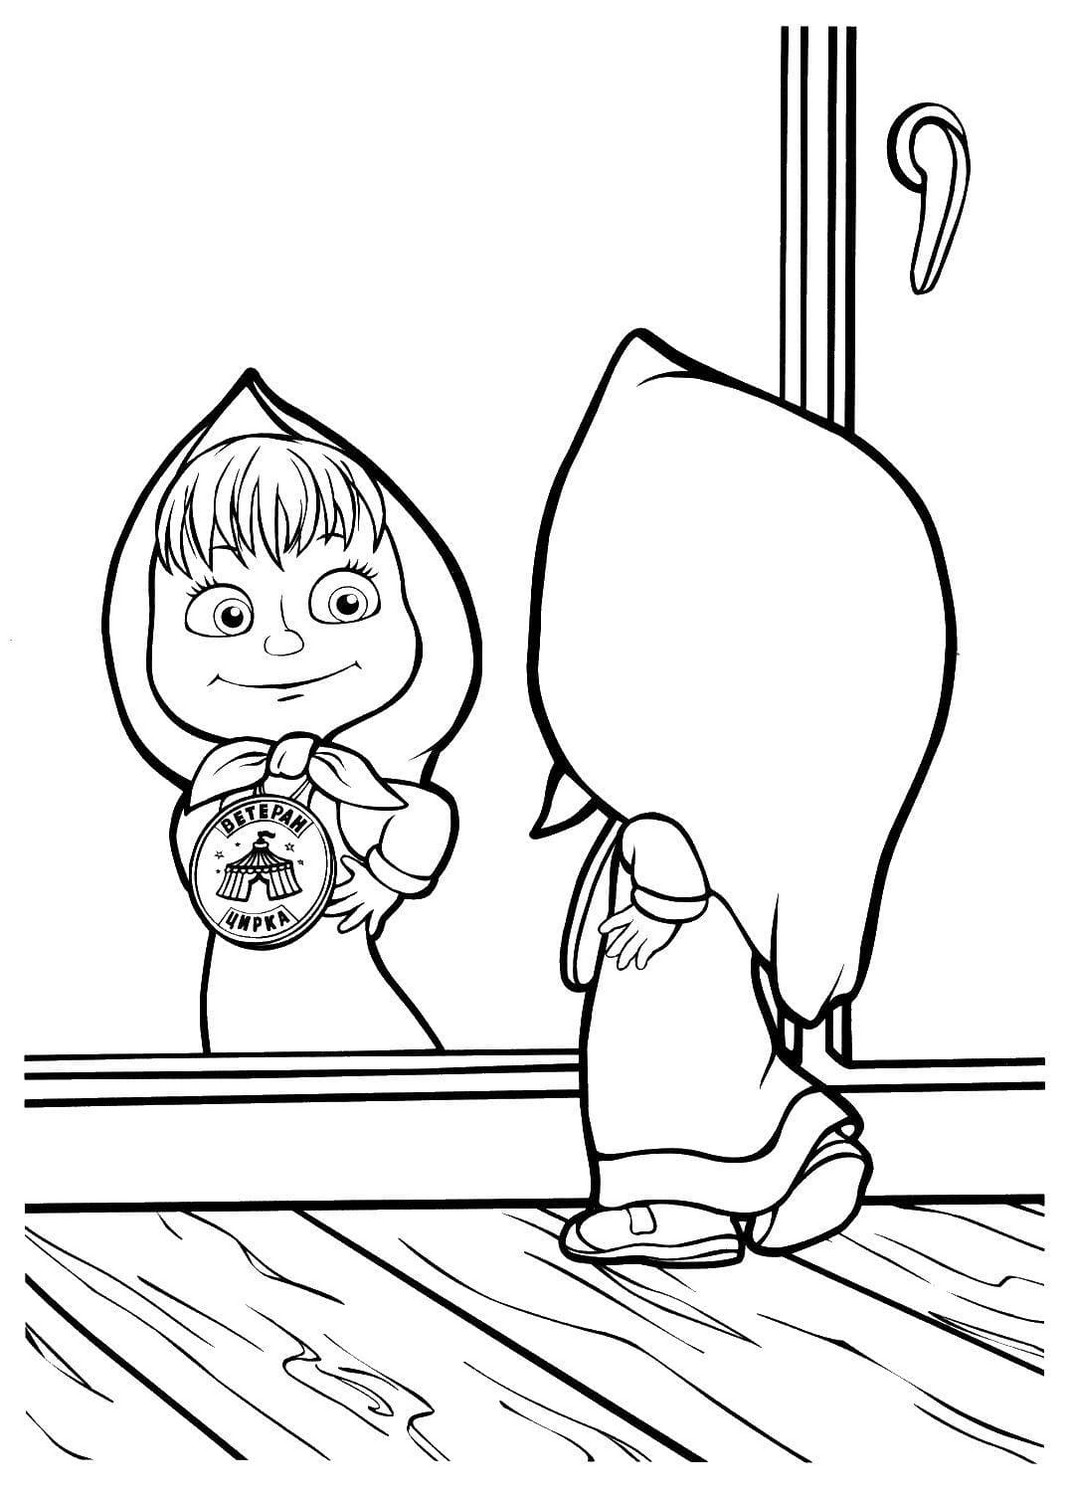 Drawing 42 of Masha and the Bear to print and color